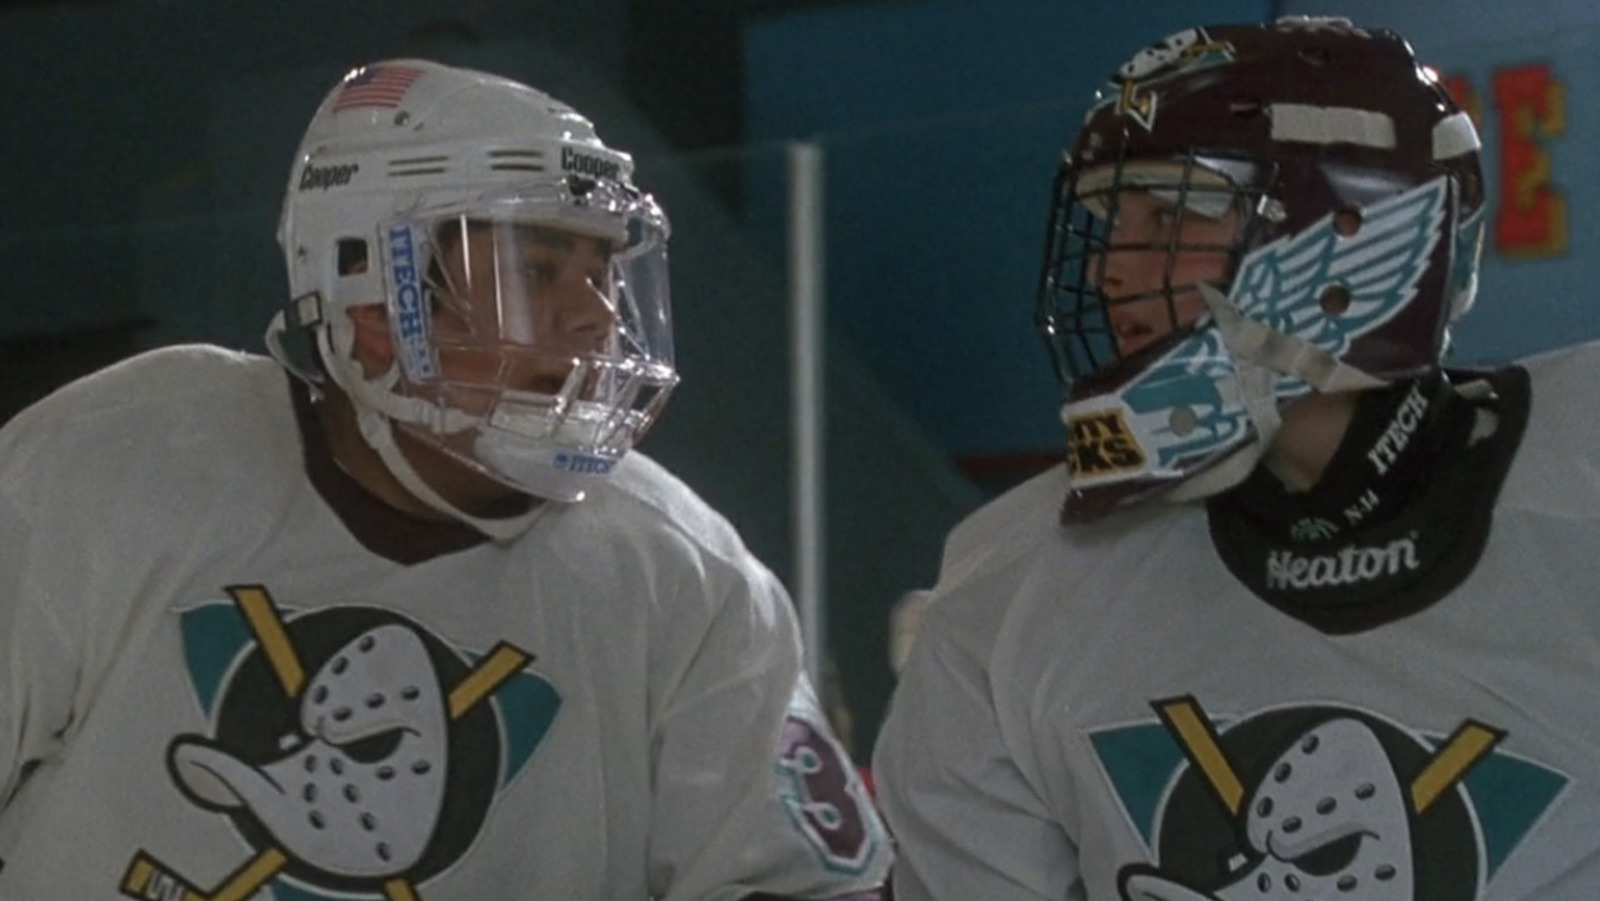 The Mighty Ducks - Rotten Tomatoes